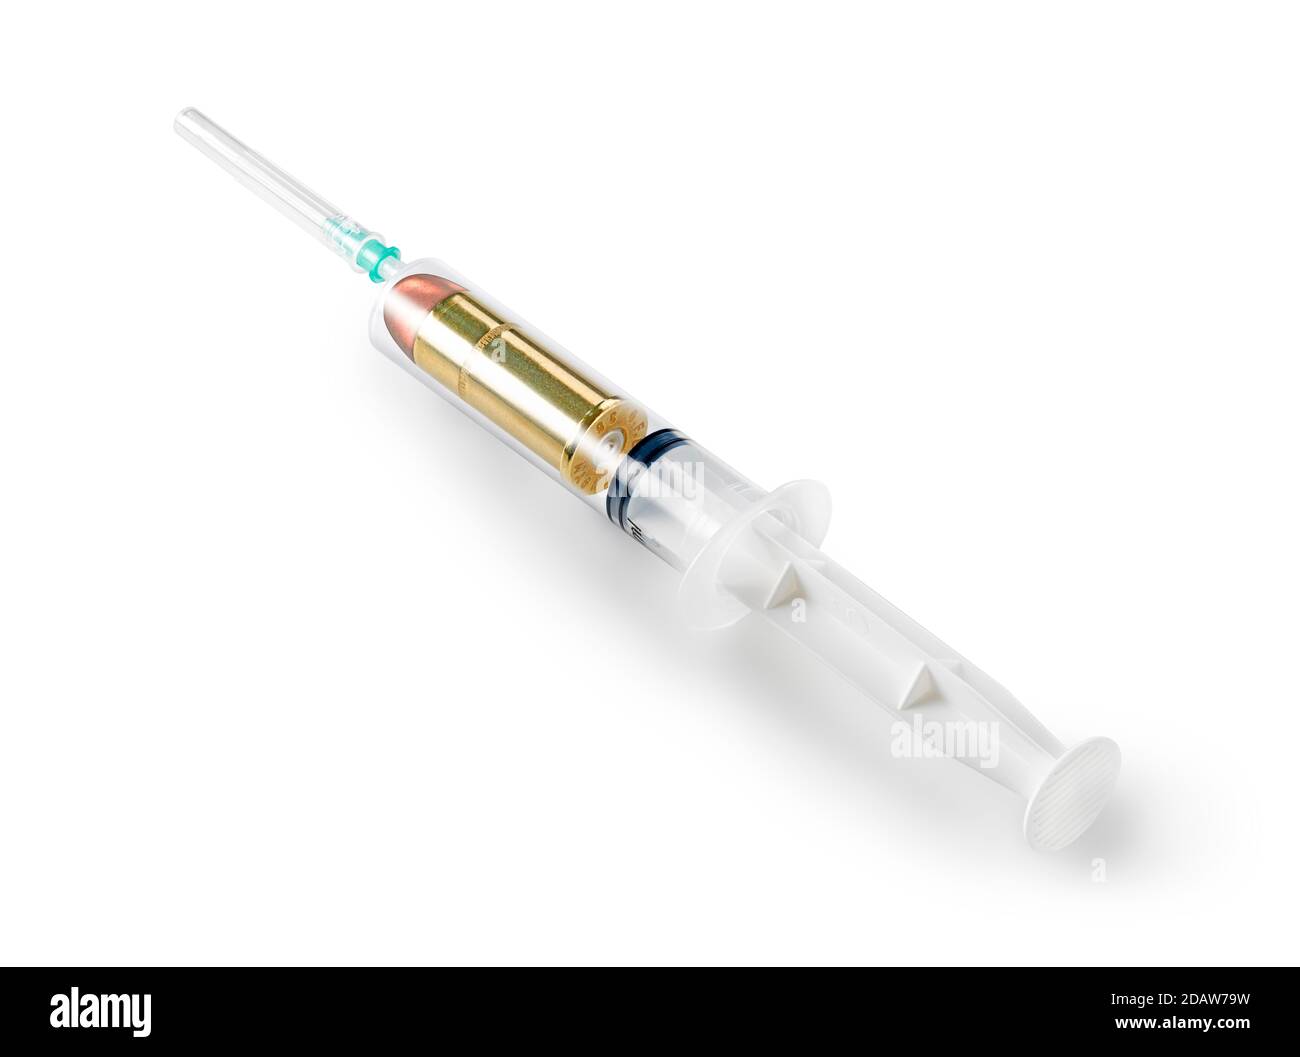 One syringe contains a dangerous bullet. Stock Photo